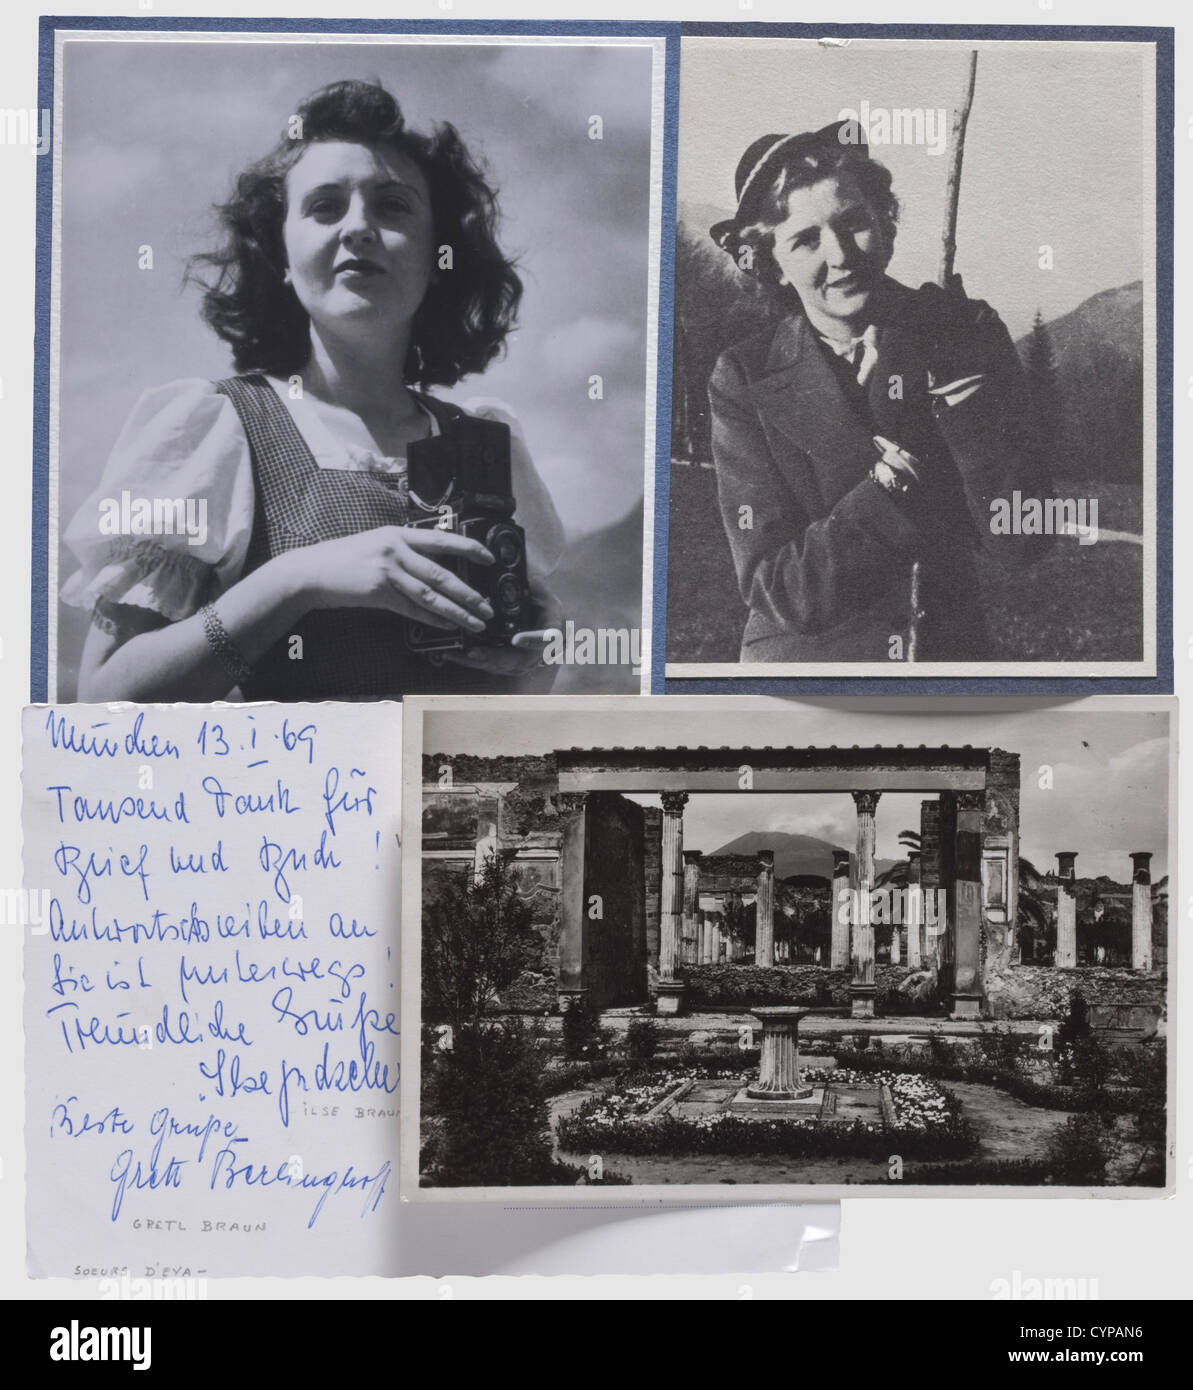 Eva Braun,Theo and Johanna Morell,A picture postcard("Haus of Pansa")from  Pompeii to Eva's mother Franziska Braun 1938. With Eva Braun's Mother's Day  congratulations handwritten in ink,signed "Cordial greetings!  Eva",underneath greetings from Marion and